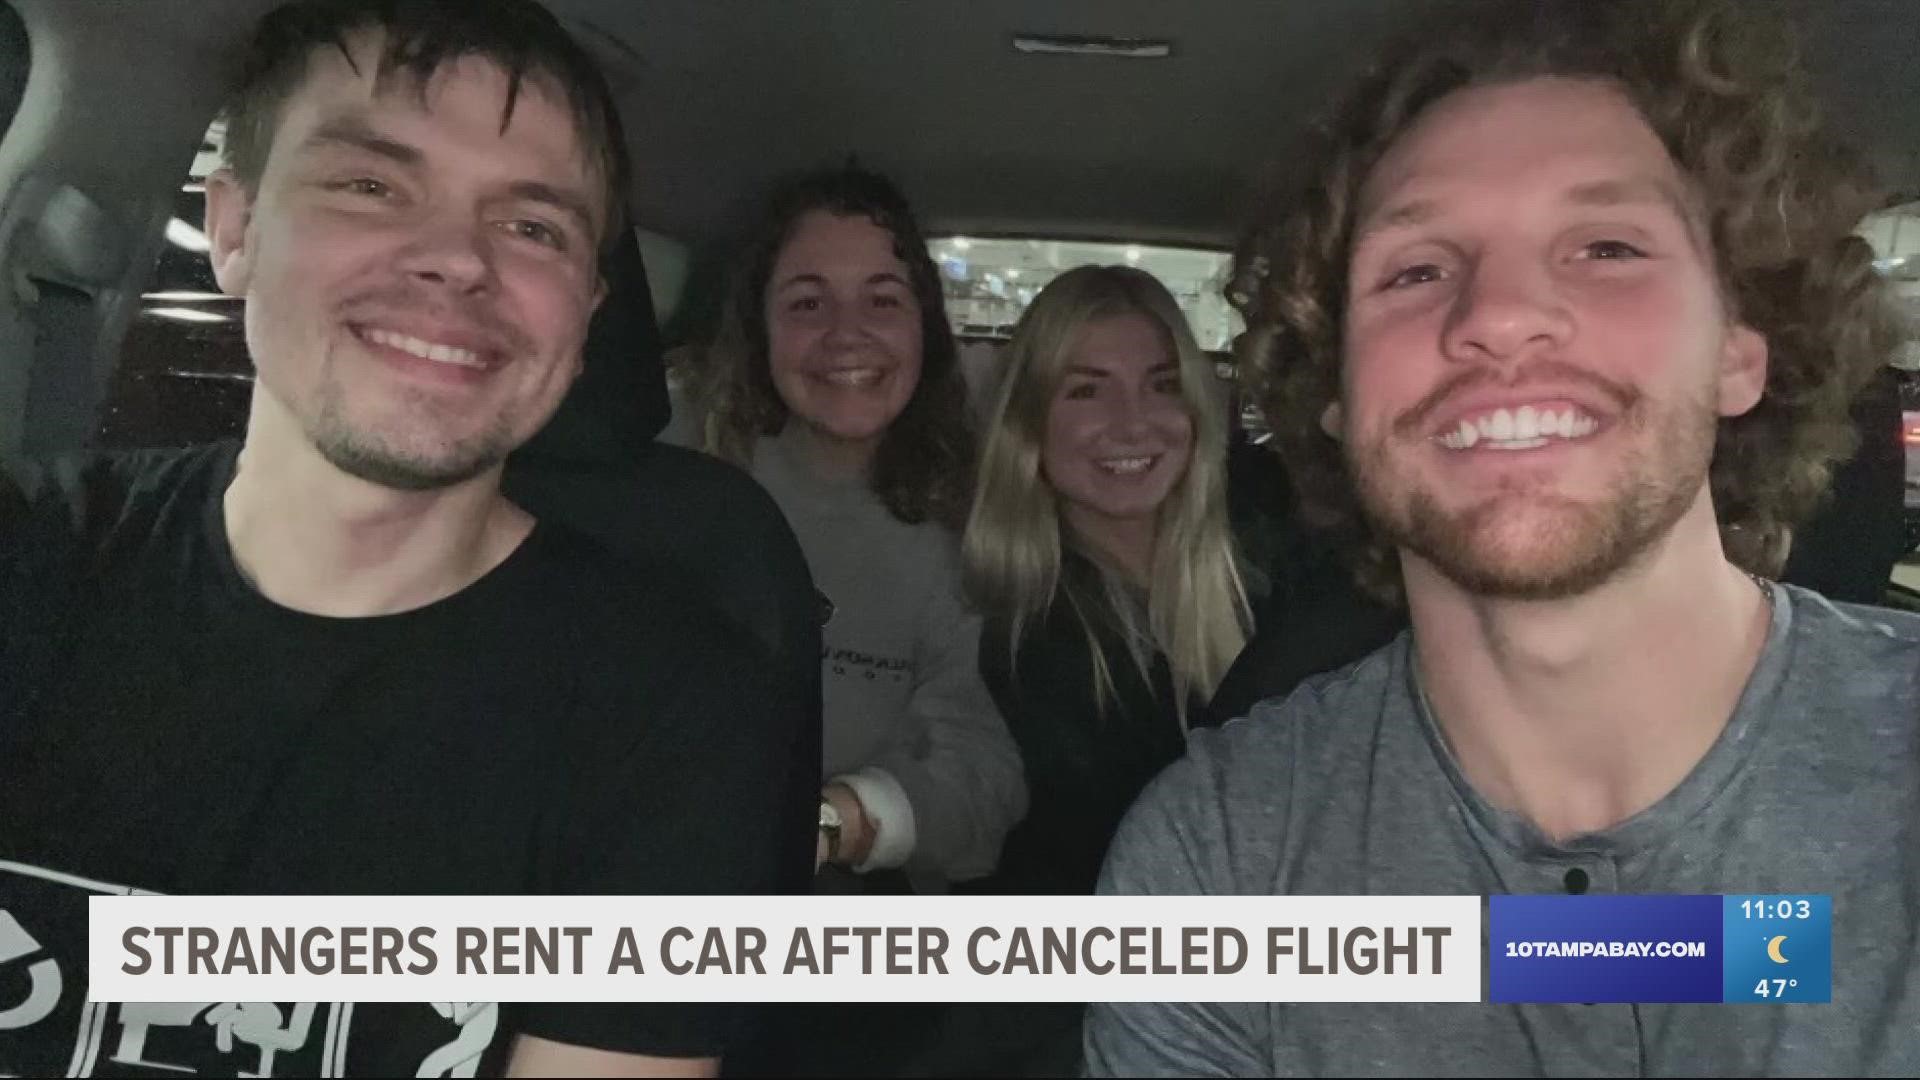 Due to the winter storm, many are seeing canceled flights. That's why a group of strangers rented a car and hit the road to head home for the holidays.